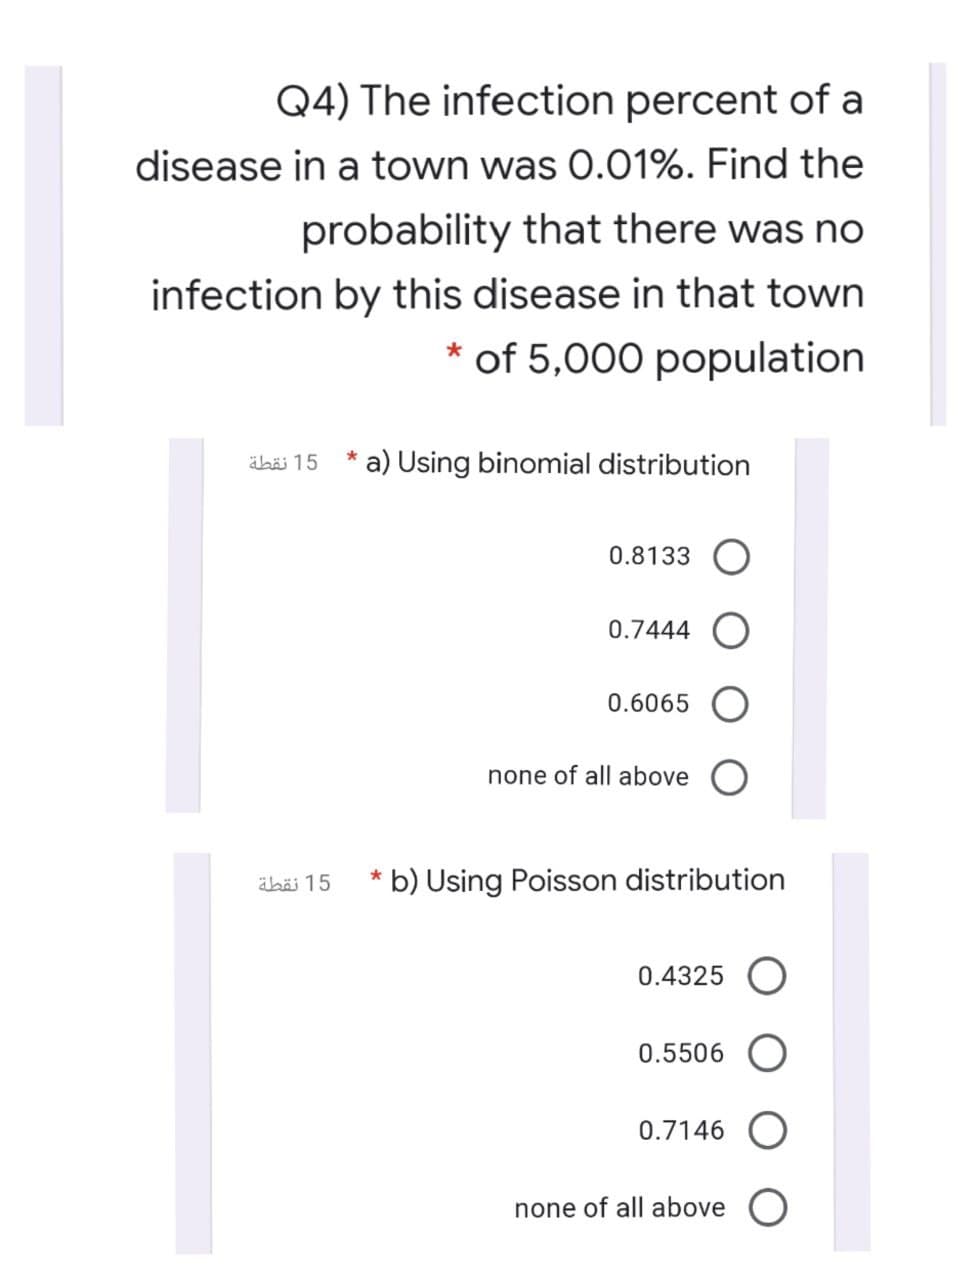 Q4) The infection percent of a
disease in a town was 0.01%. Find the
probability that there was no
infection by this disease in that town
* of 5,000 population
15 نقطة
a) Using binomial distribution
0.8133
0.7444
0.6065 O
none of all above
äbäi 15
* b) Using Poisson distribution
0.4325 O
0.5506 O
0.7146 O
none of all above O
